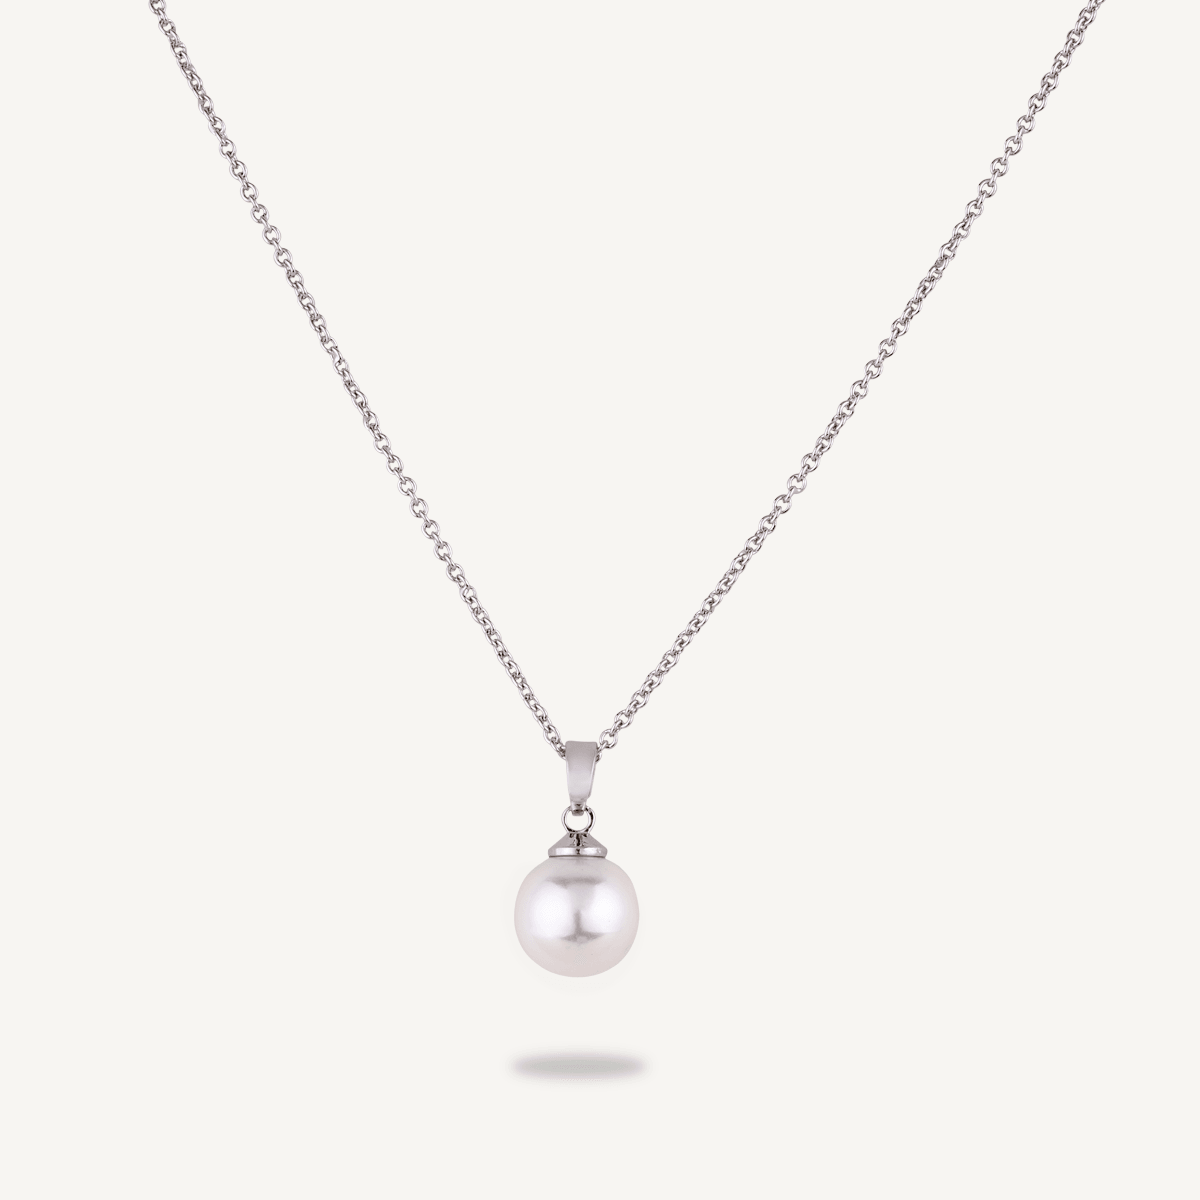 Silver Chain With A Mother Of Pearl Pendant - D&X Retail